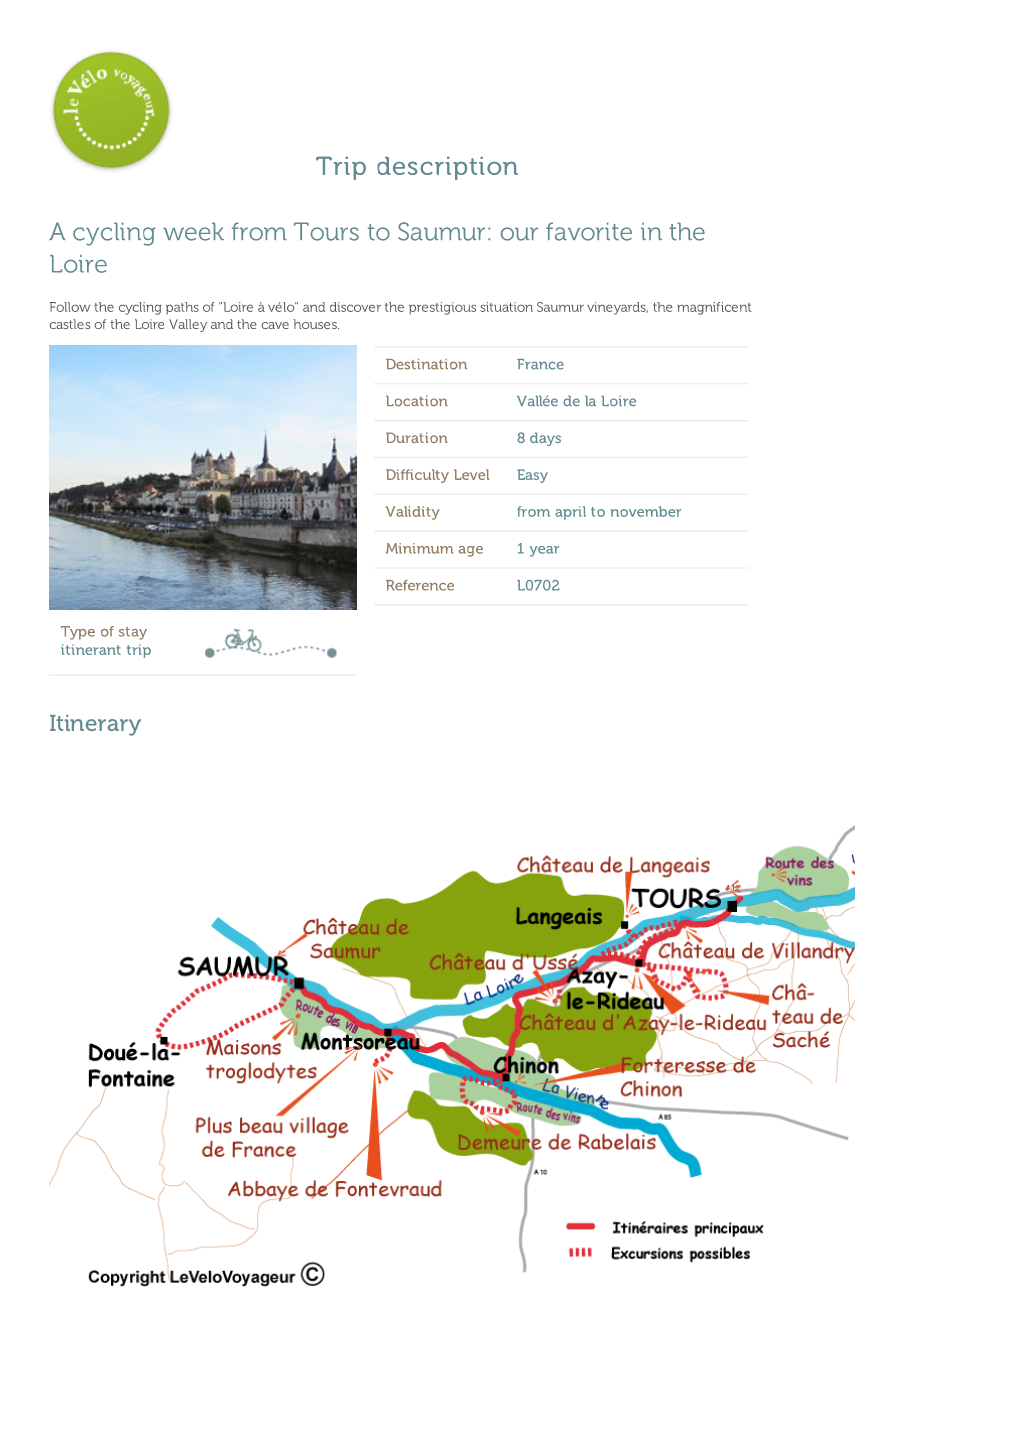 Trip Description a Cycling Week from Tours to Saumur